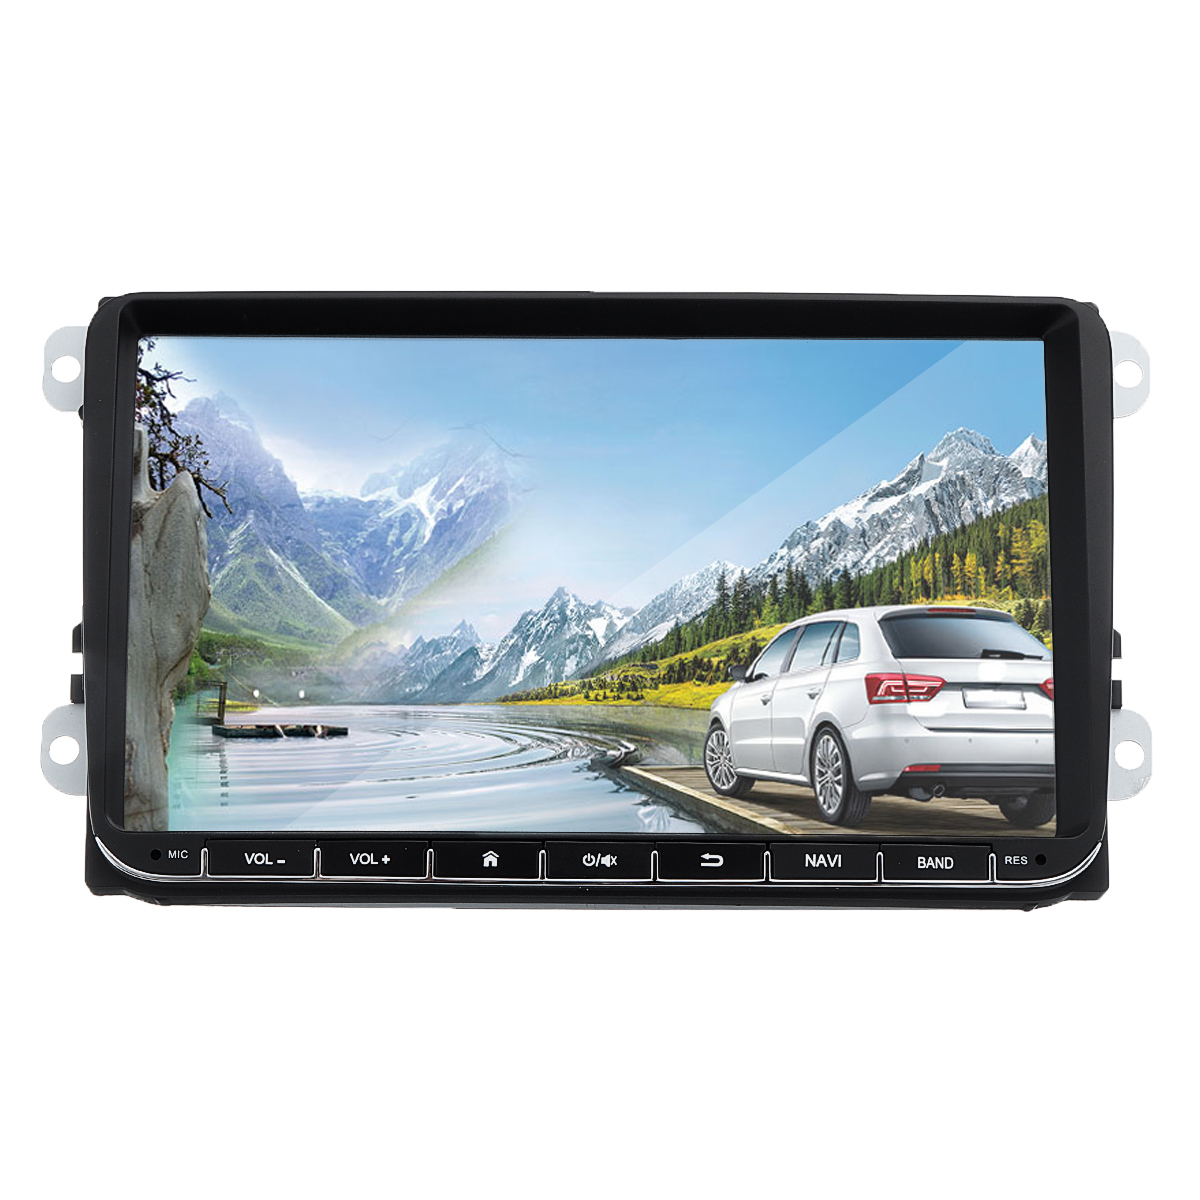 

9 Inch 2DIN for Android 8.1 HD Car Multimedia Player Quad Core 1G+16G Touch Screen Car Radio Stereo bluetooth FM AM DAB DTV USB for VW/Skoda/Seat